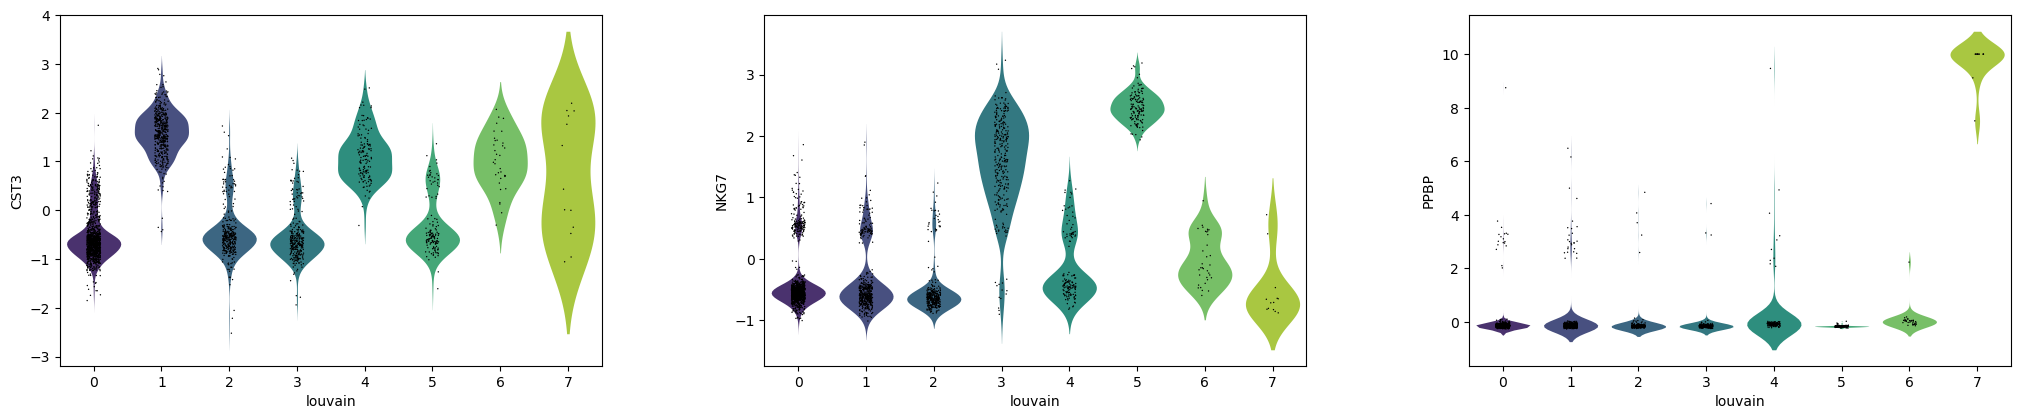 Violin plot for CST3, NKG7 and PPBP after clustering. 